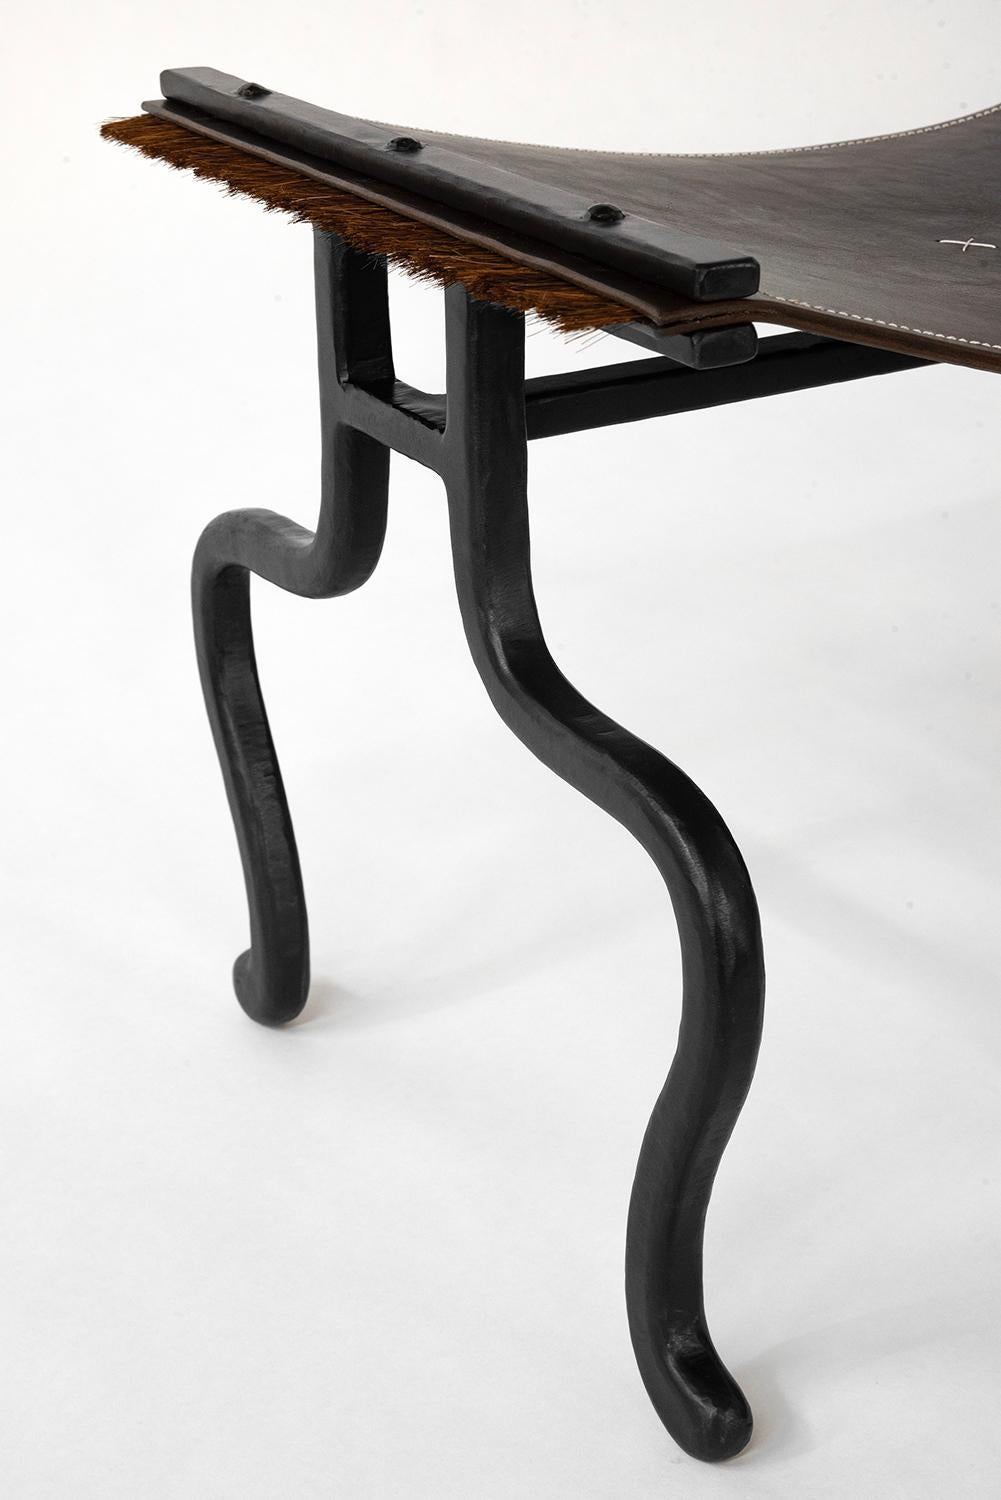 Bench Organic Contemporary Blackened Steel and Saddle Leather with Horsehair In New Condition For Sale In Bronx, NY